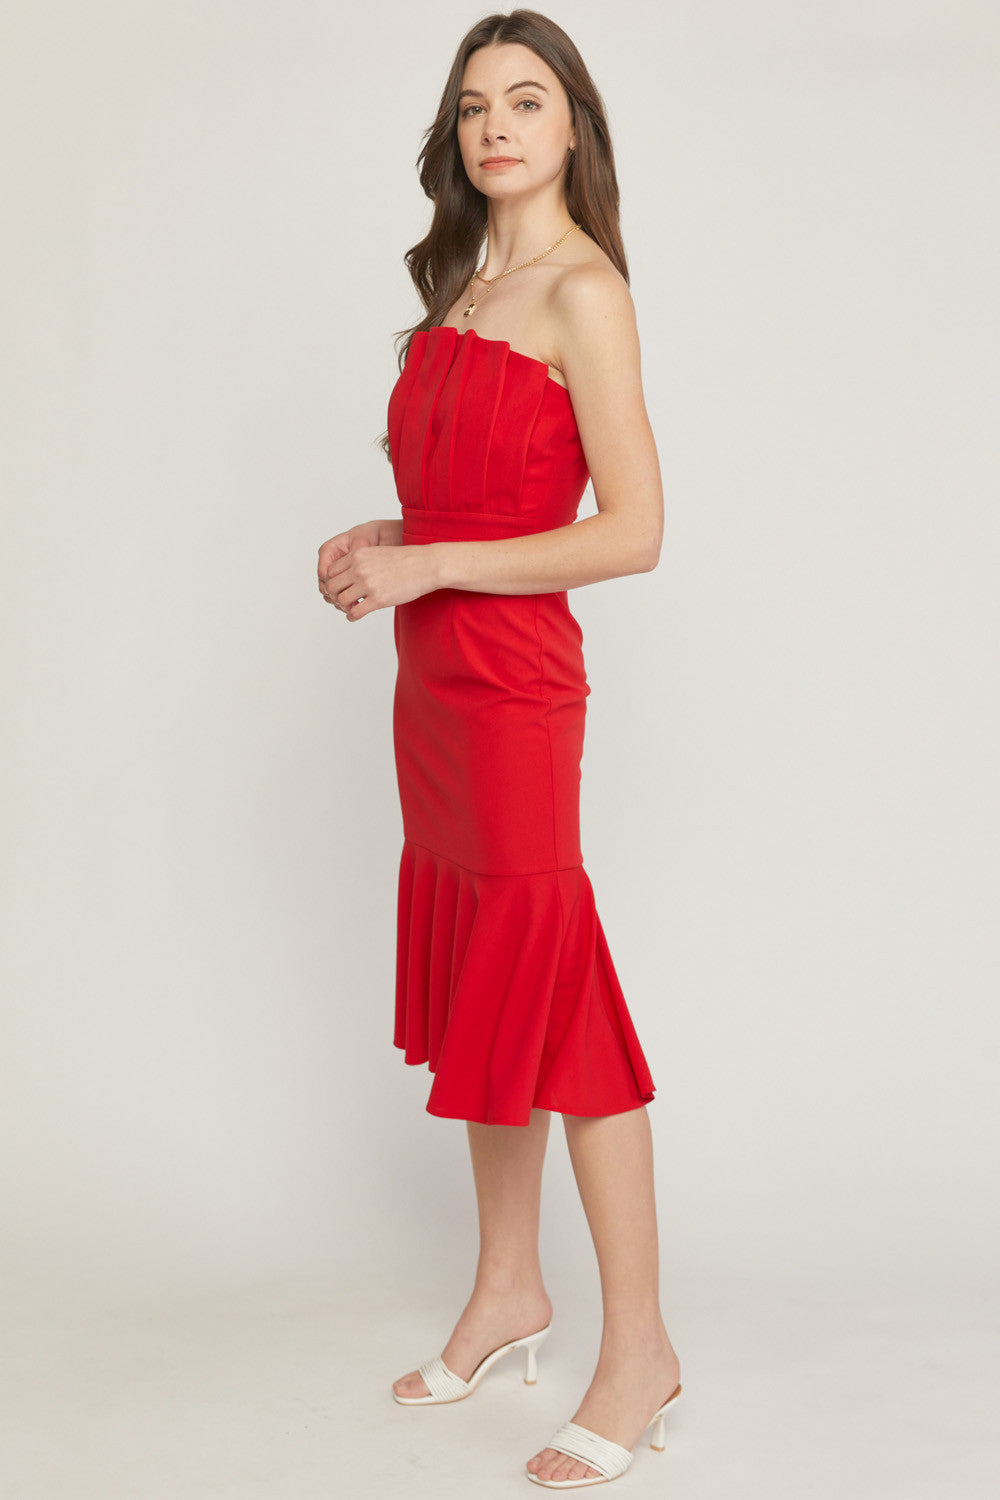 It All Begins With Love Pleated Strapless Dress